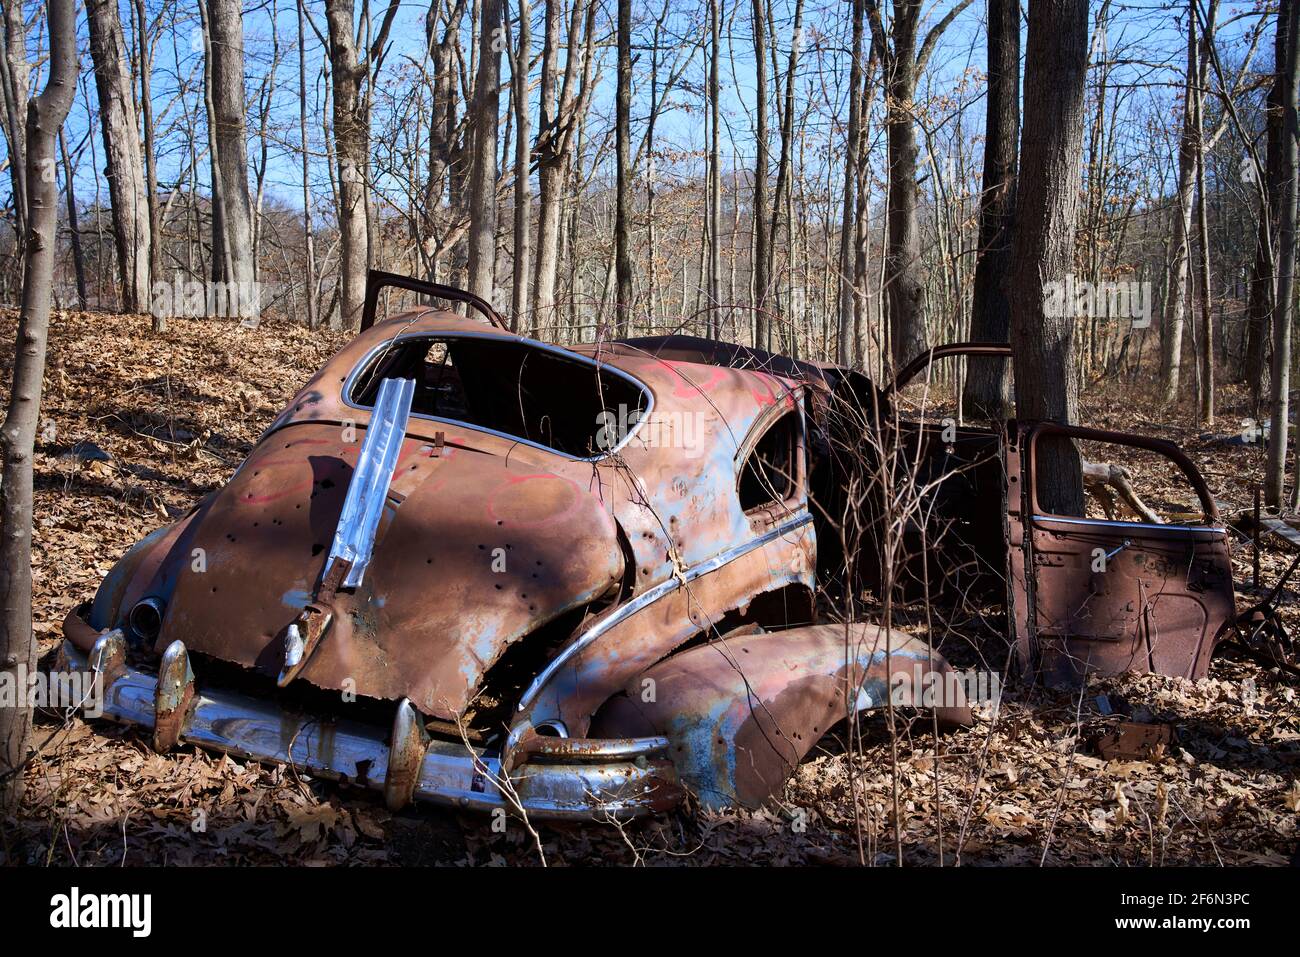 Oldtimer American car wreck abandoned and dumped in the woods. Stock Photo